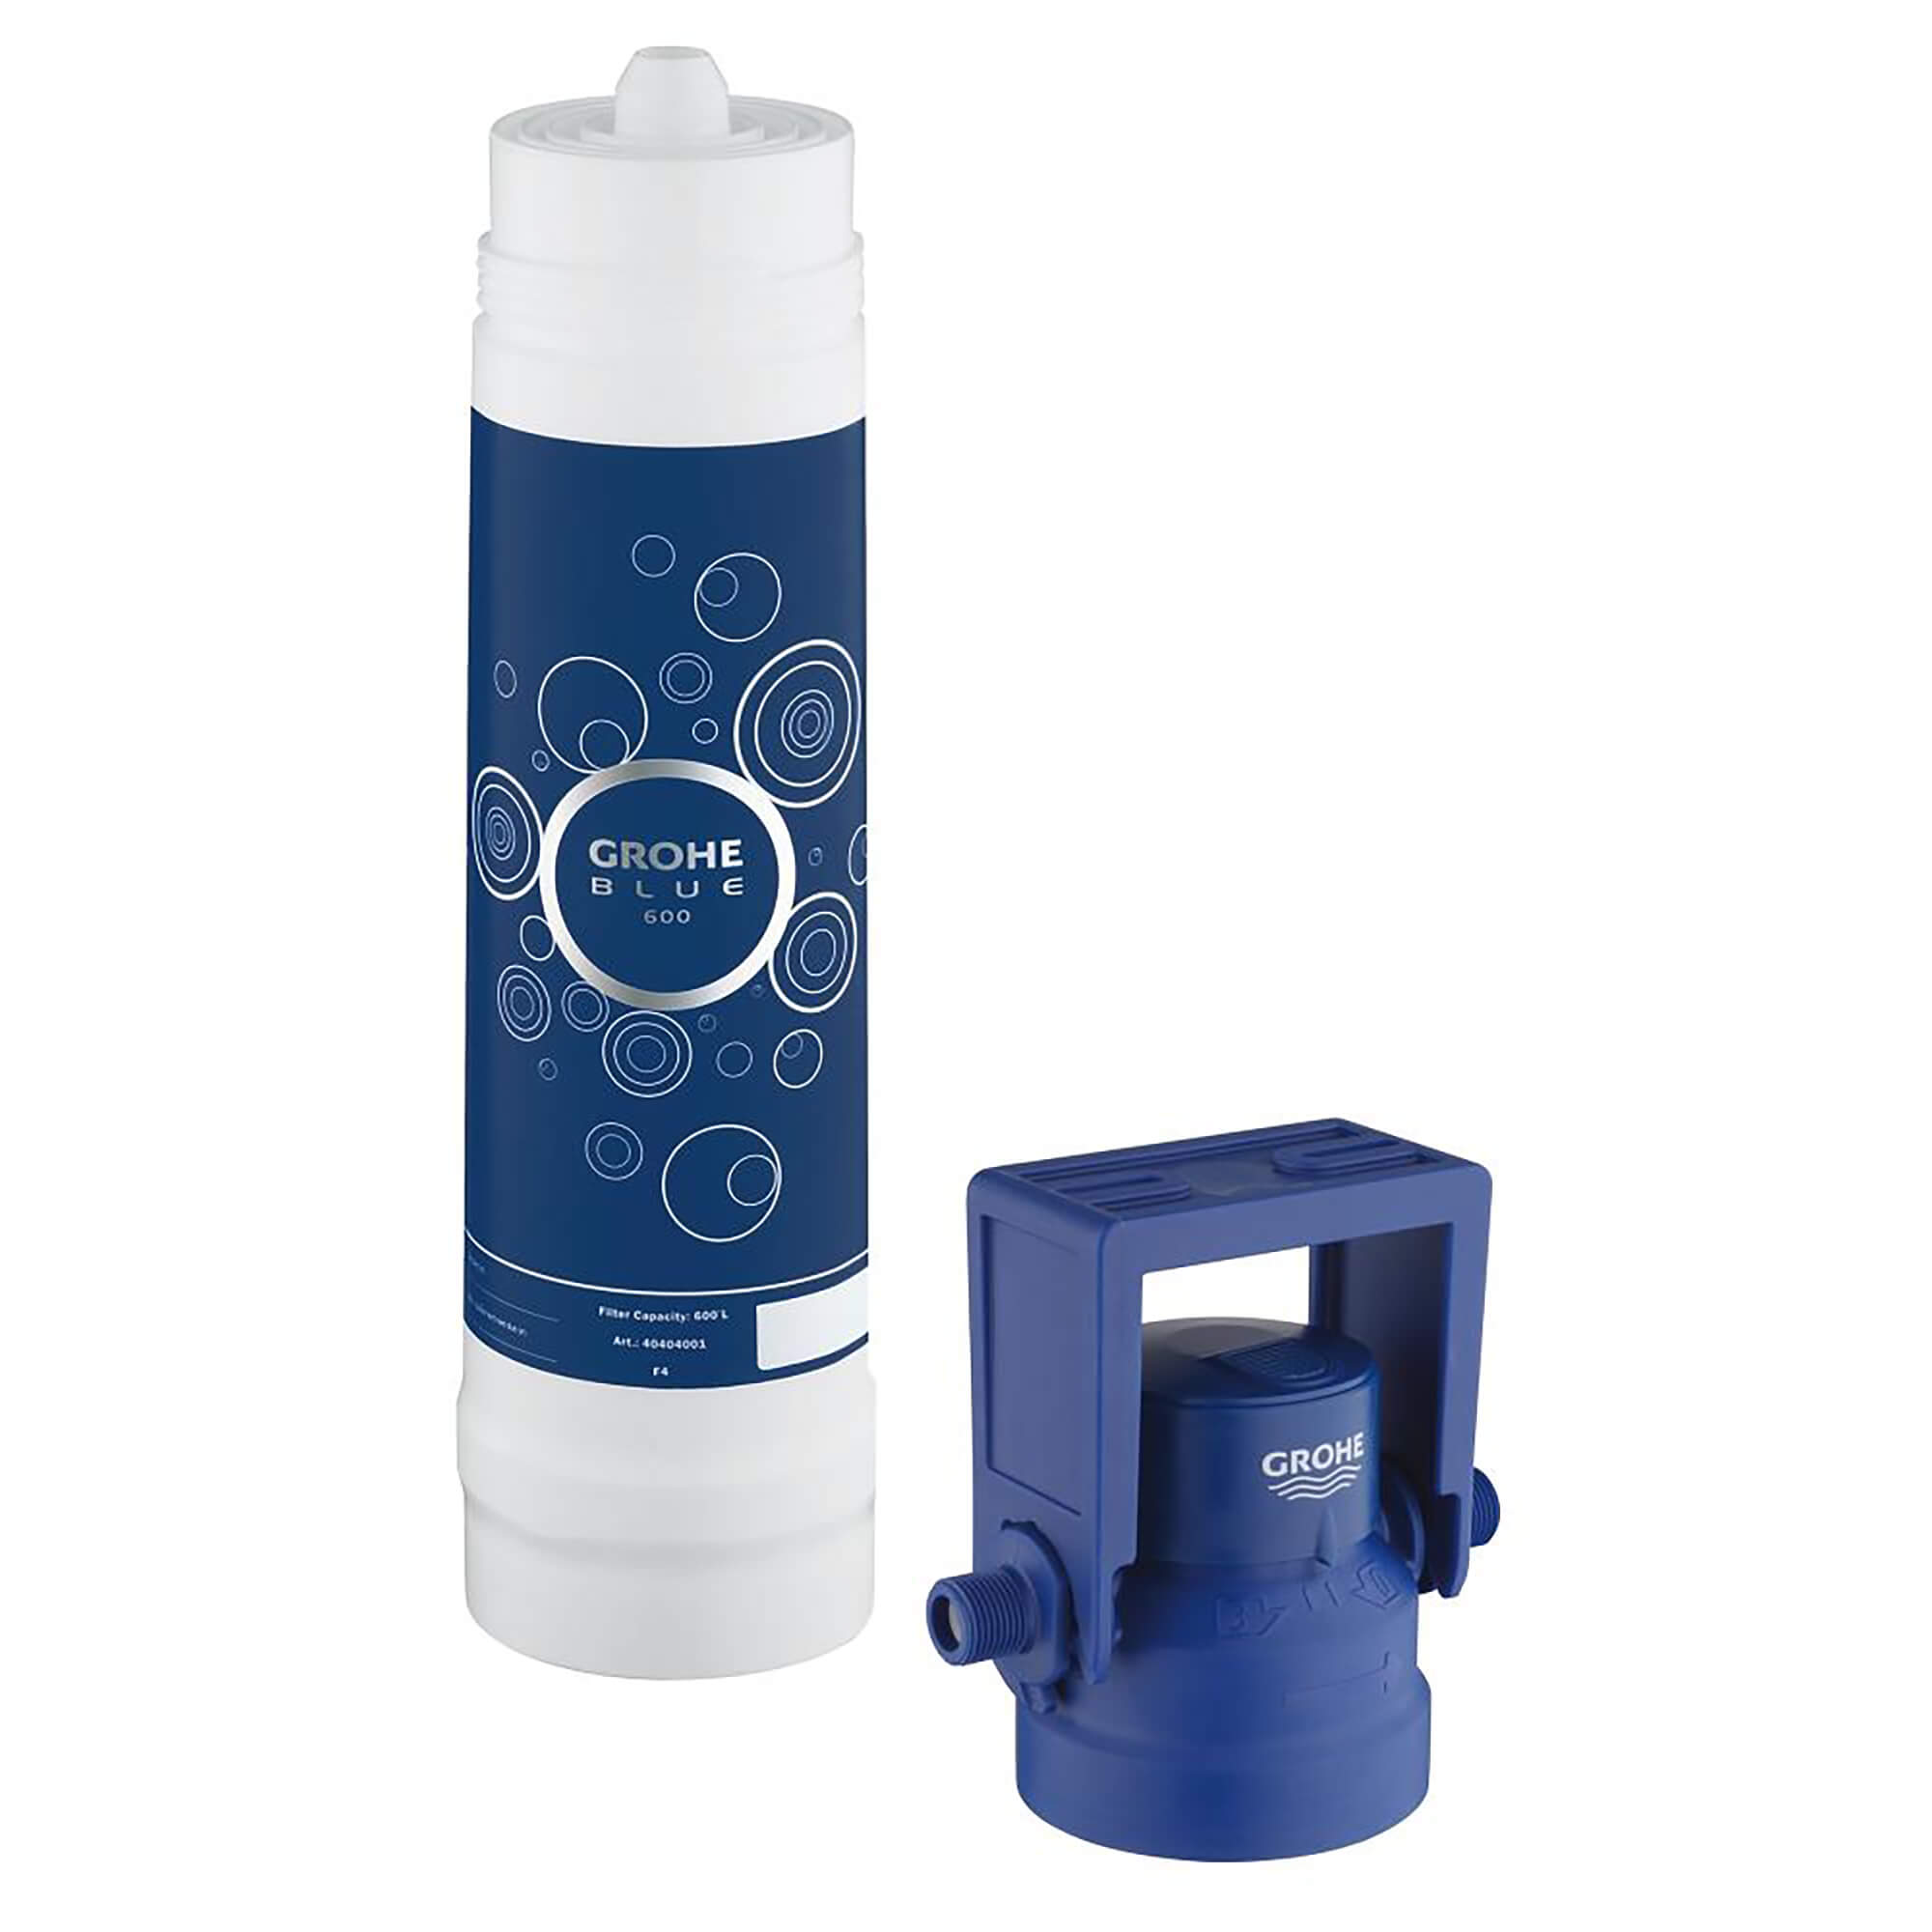 Skift GROHE S filter GROHE Blue Professional 